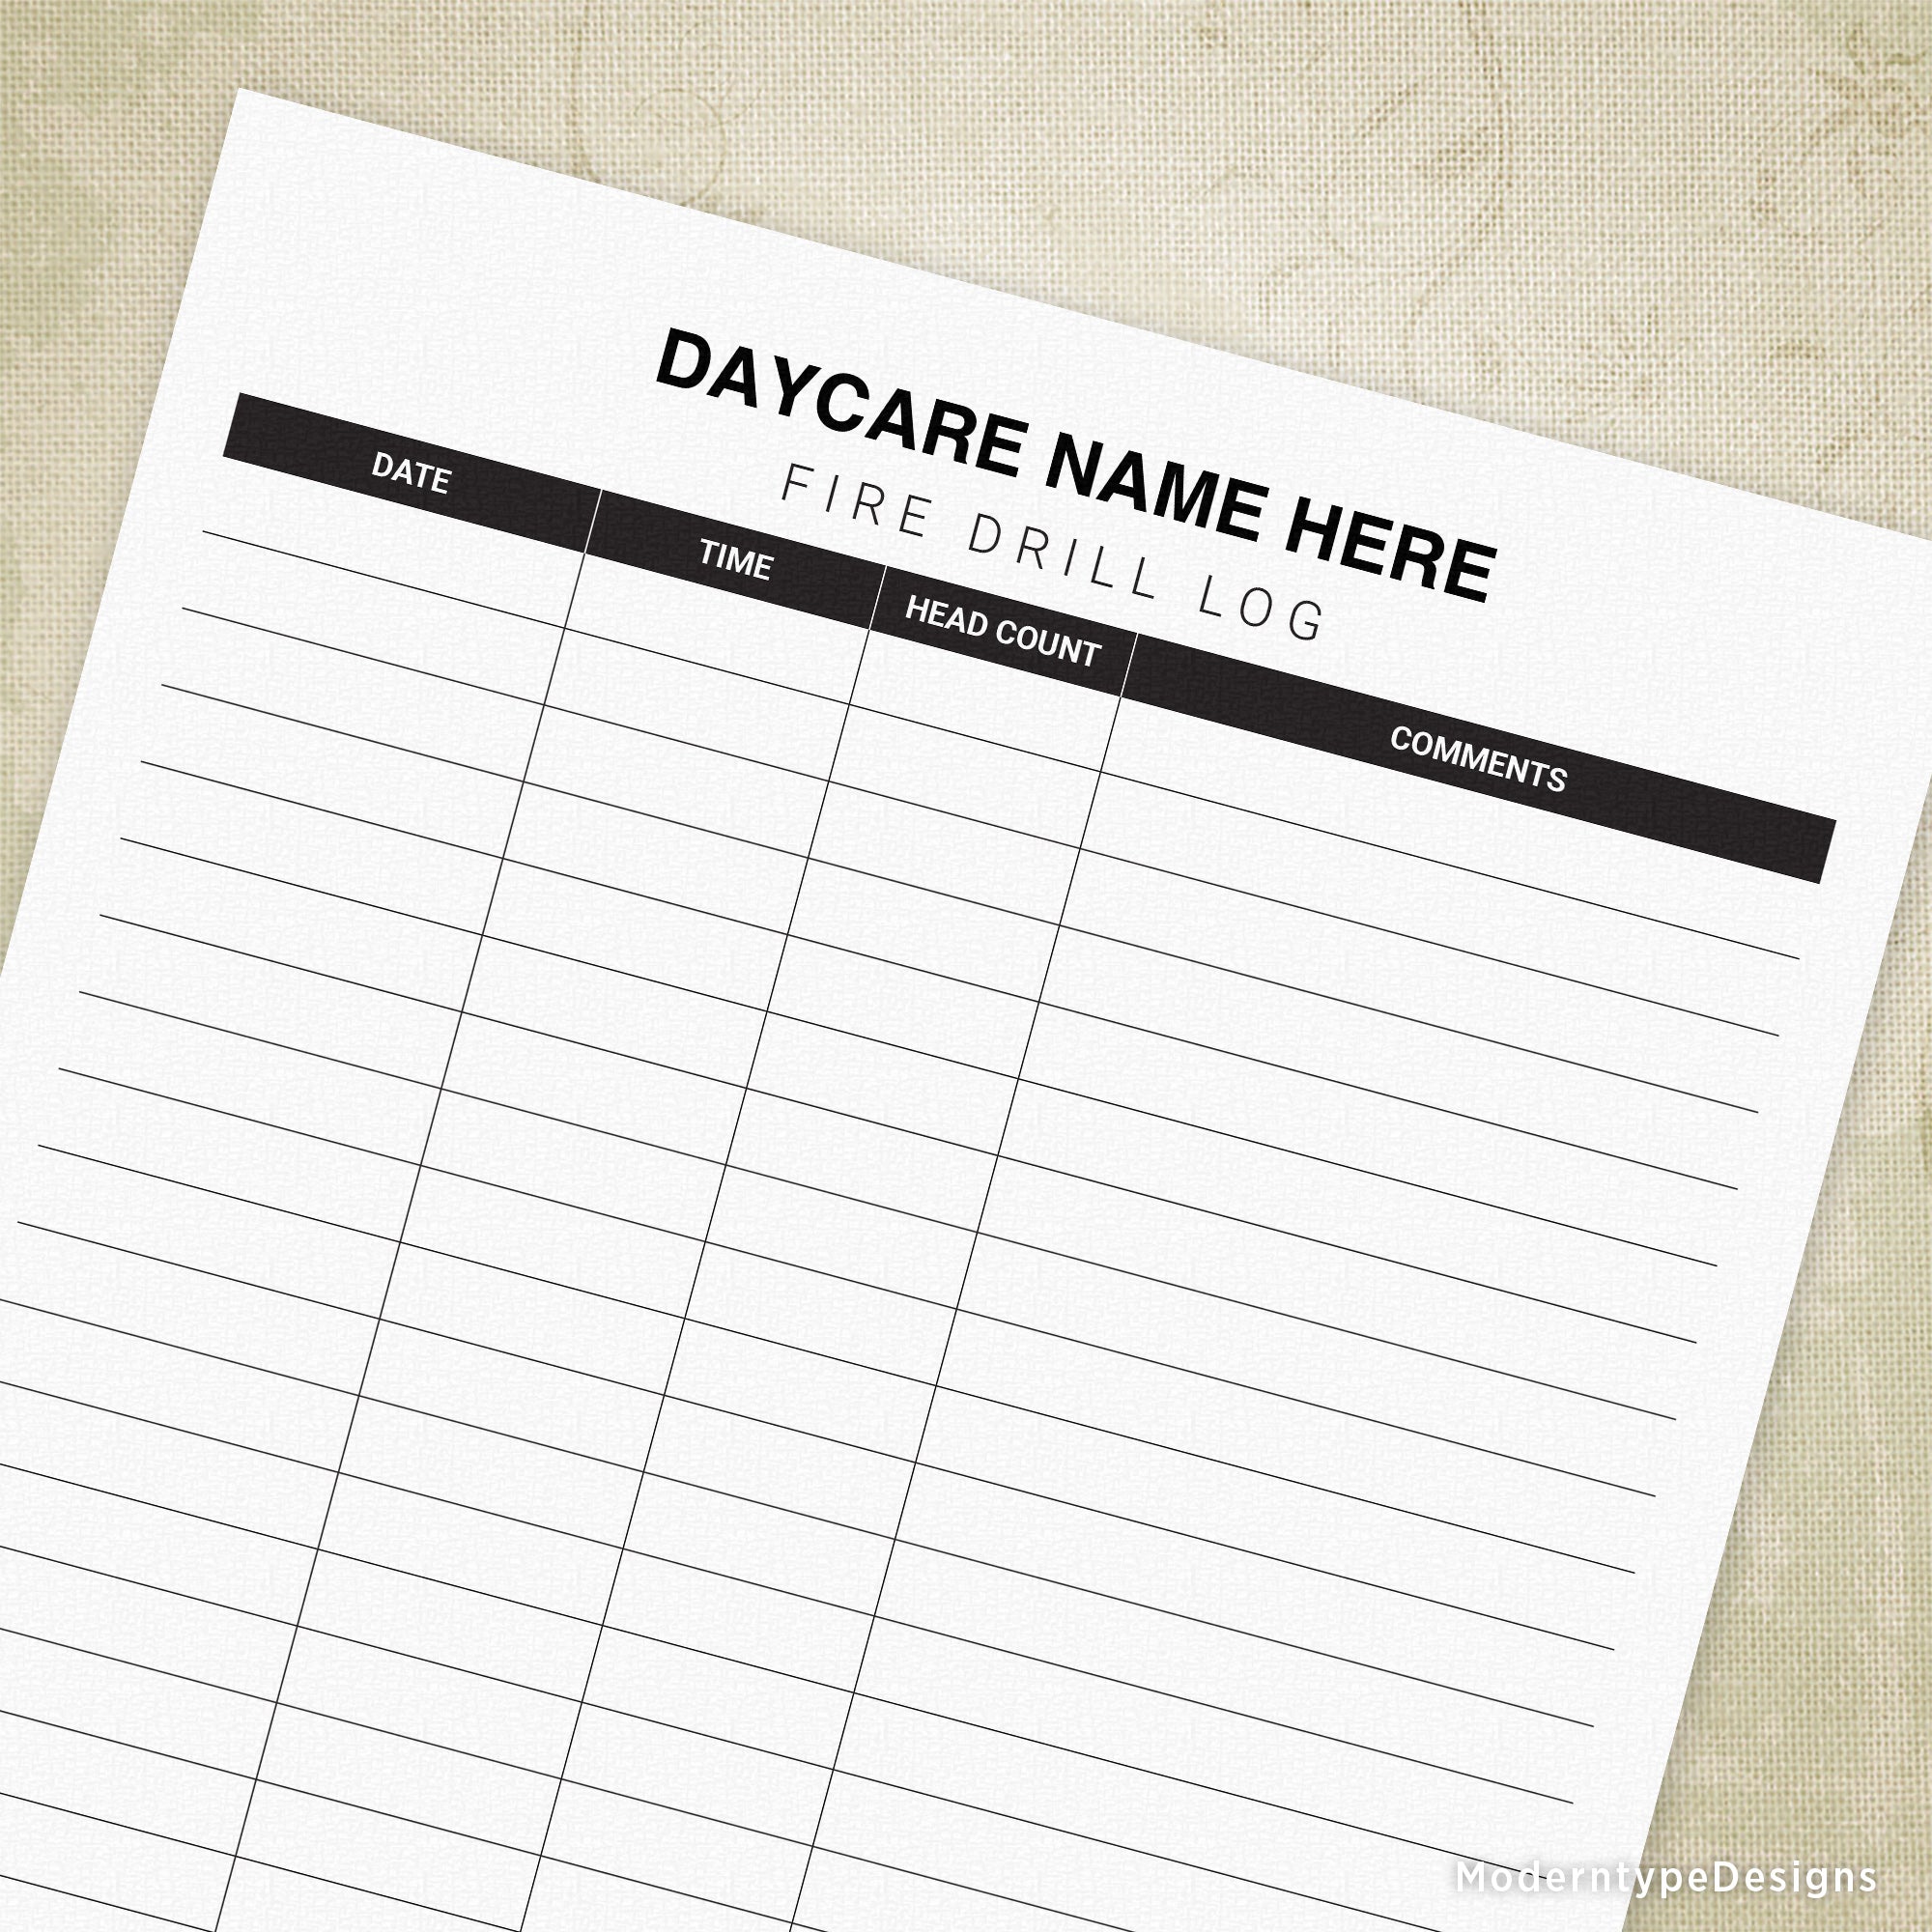 Daycare Fire Drill Log Printable, Personalized